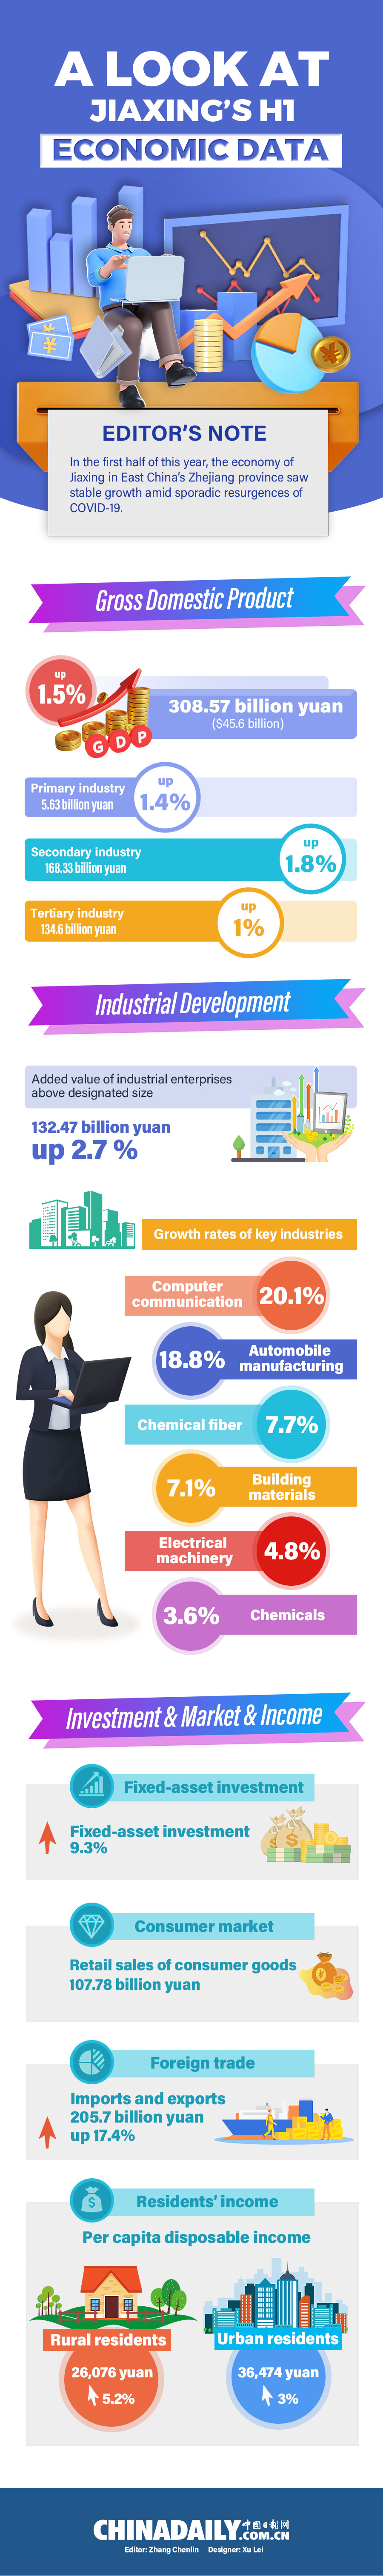 a look at jiaxing's economic growth.jpg